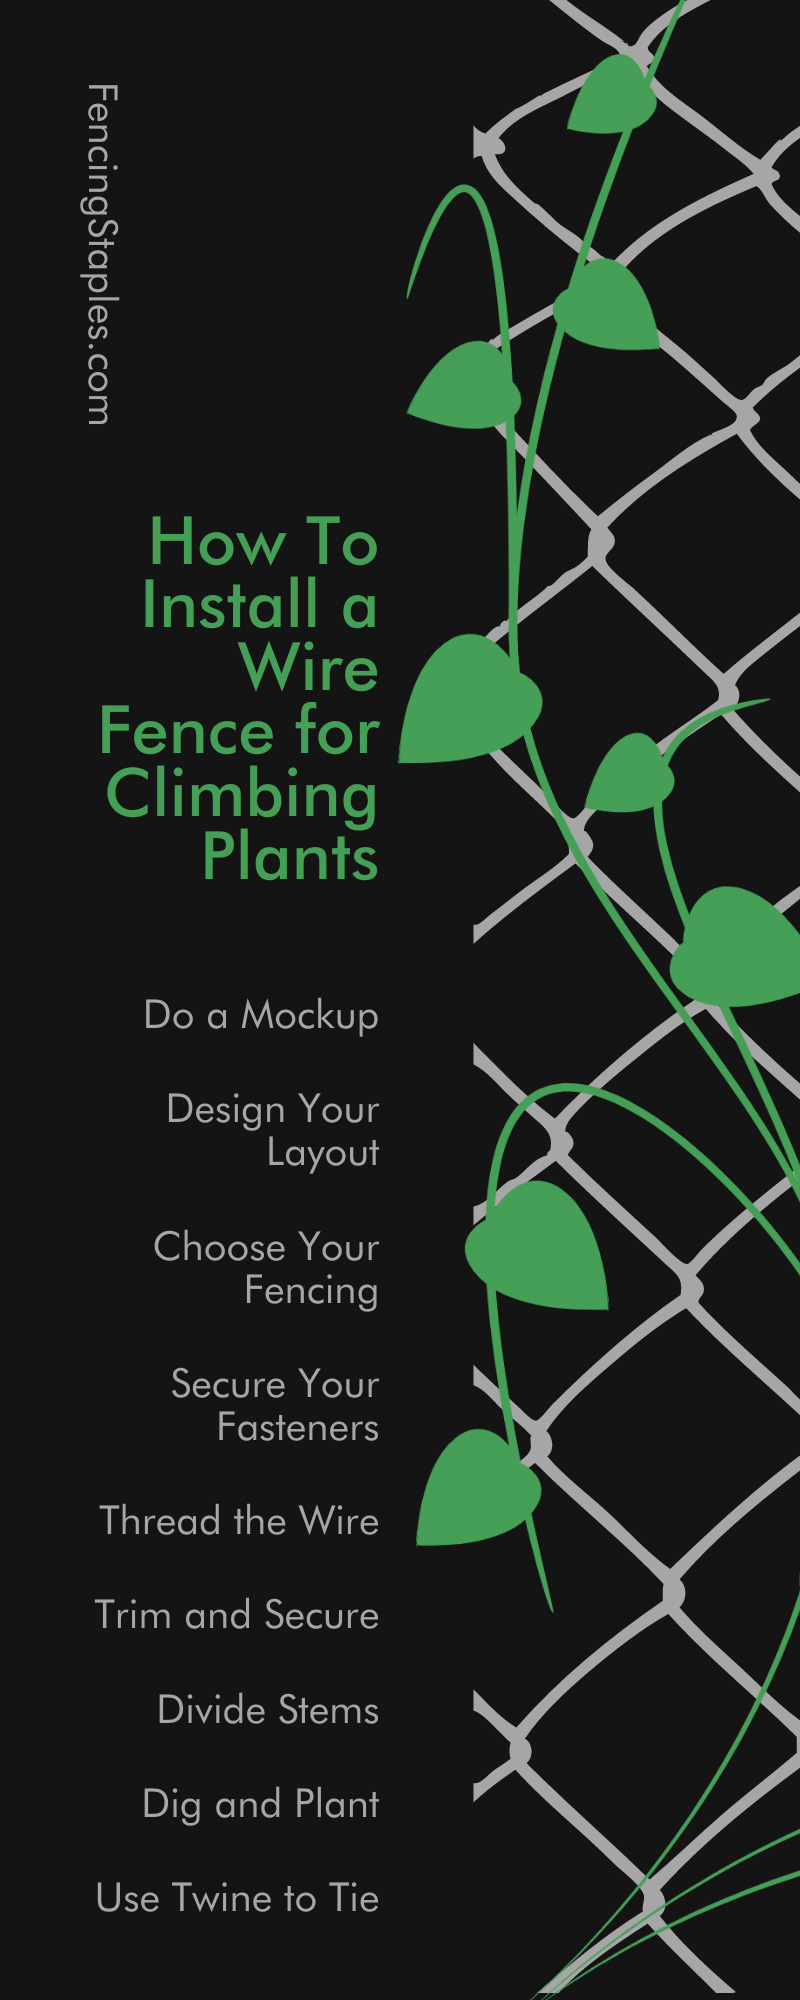 How To Install a Wire Fence for Climbing Plants